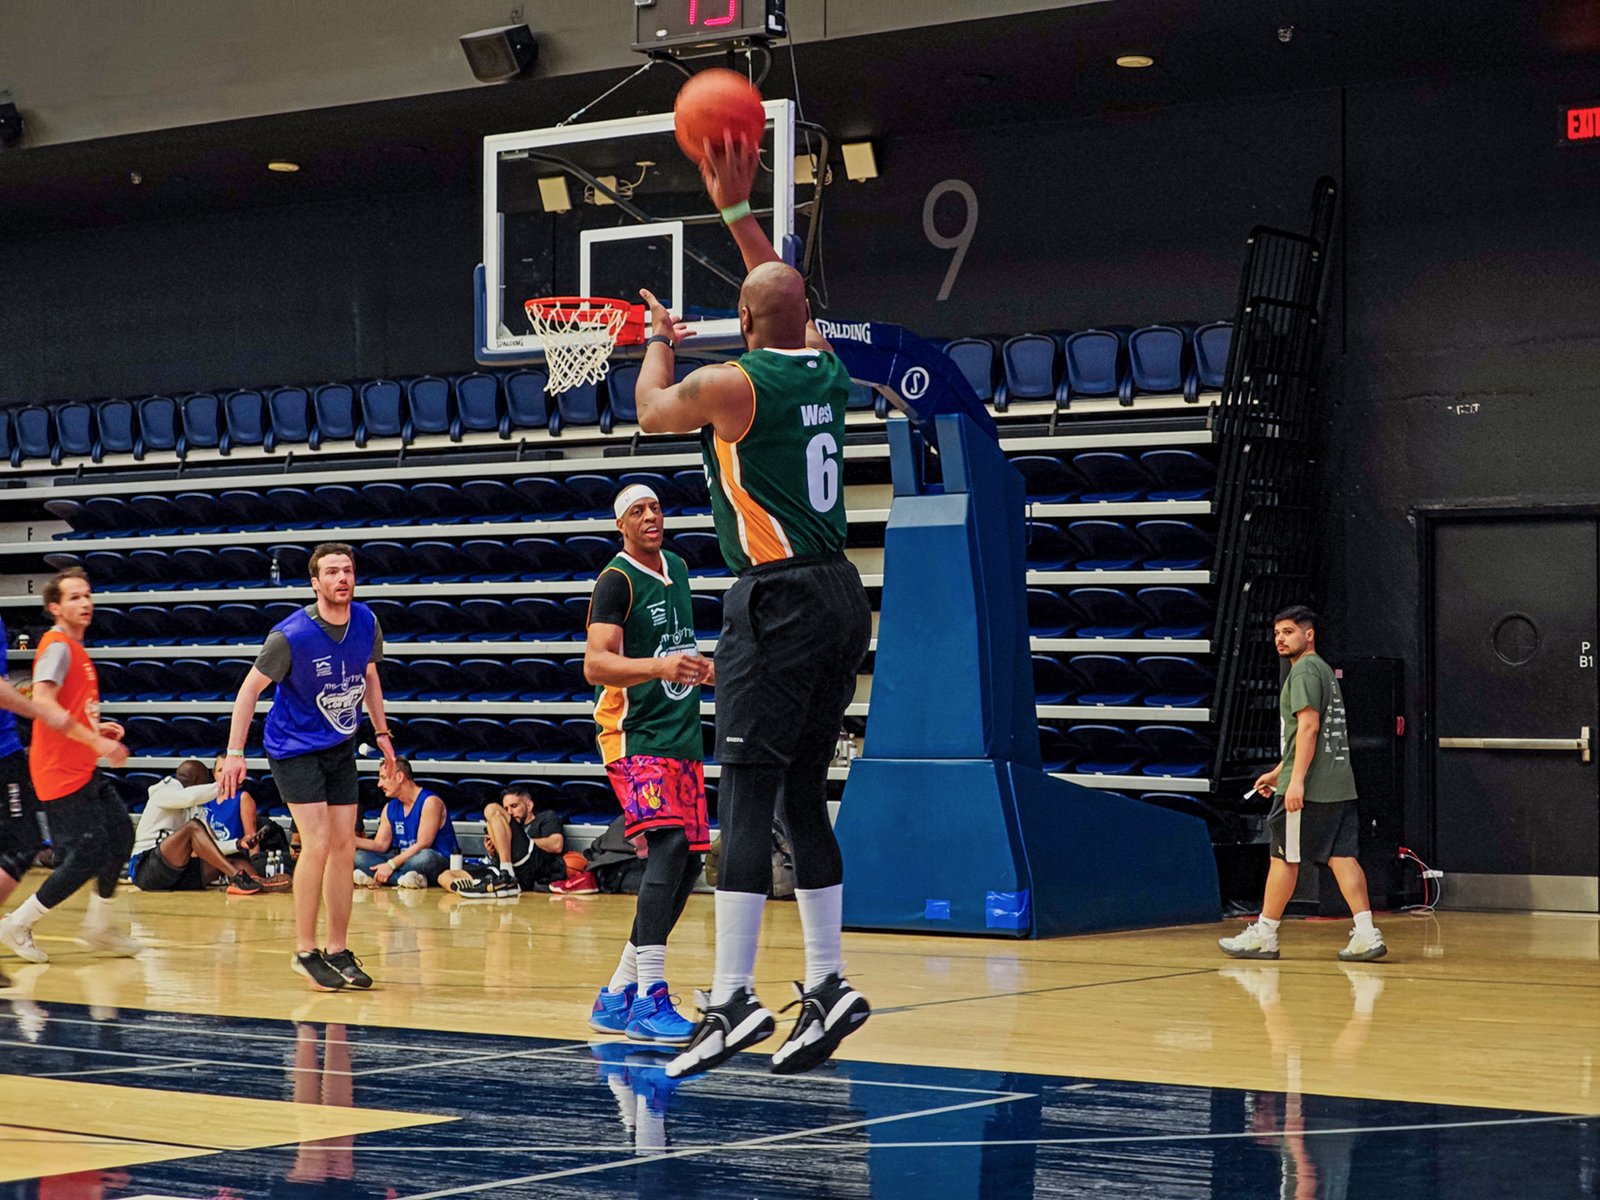 A basketball player in a green and white jersey, number 6, shooting a basketball towards the hoop during a game in an indoor court with spectators. other players are watching and waiting in various colorful jerseys.